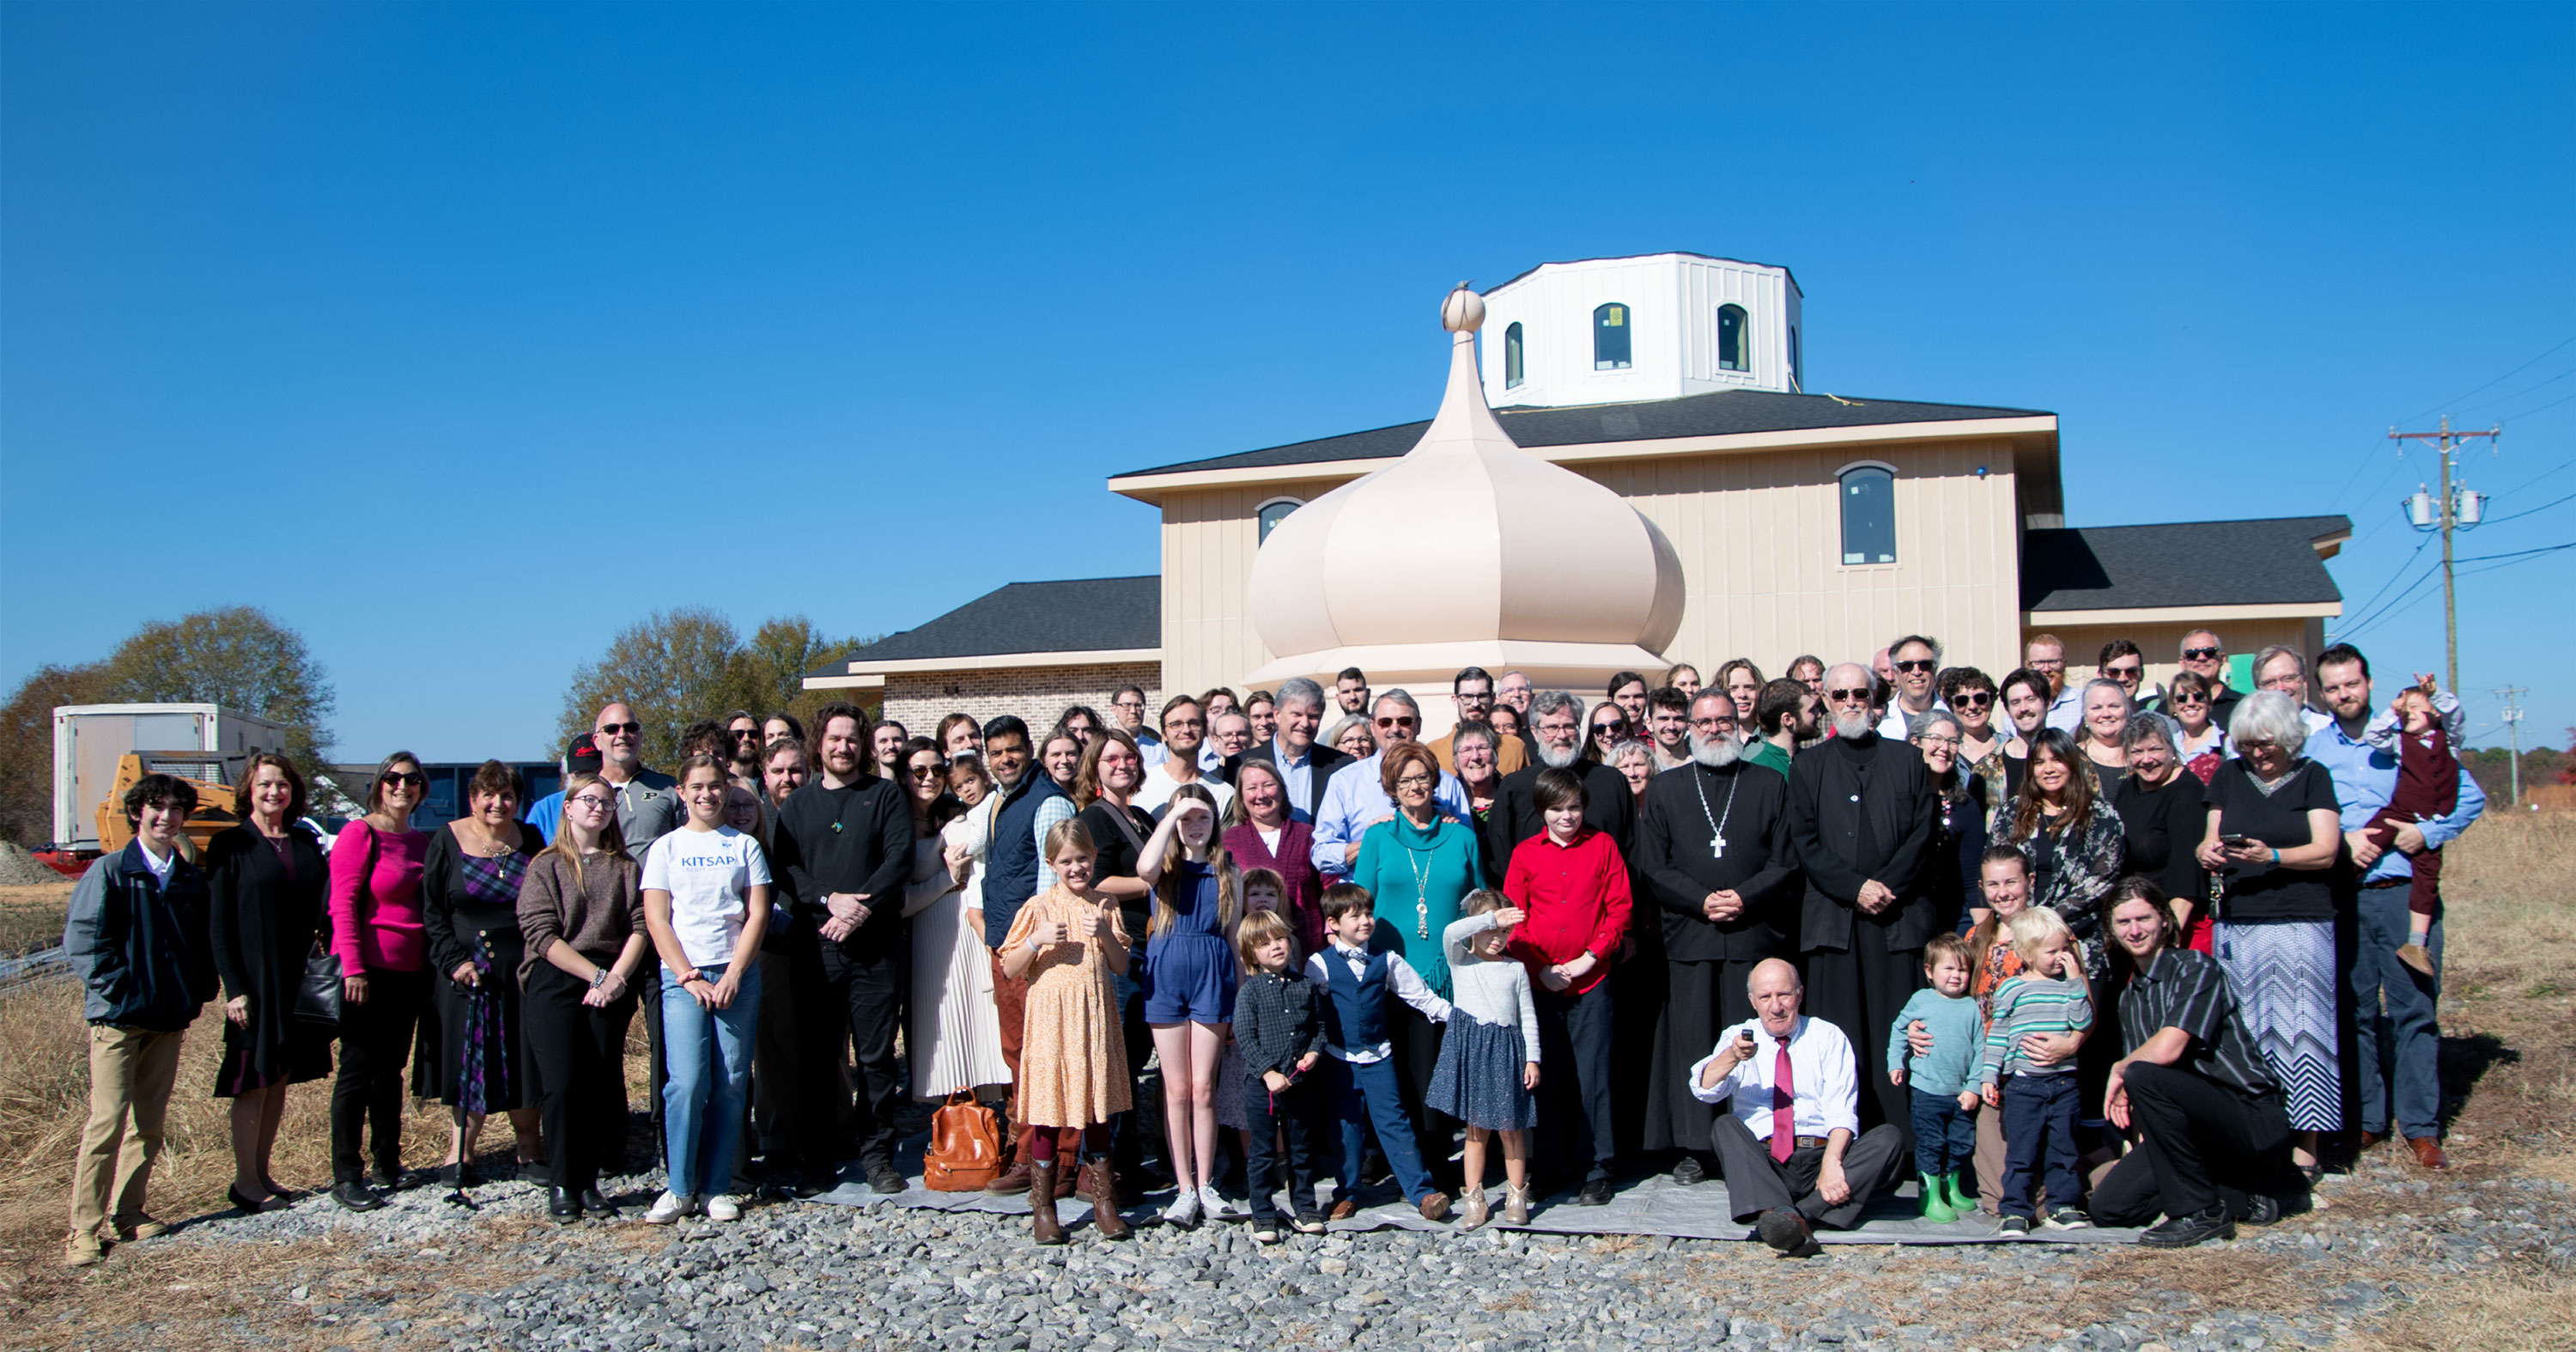 Holy Cross Orthodox Church - a group photo taken beside our new church building!